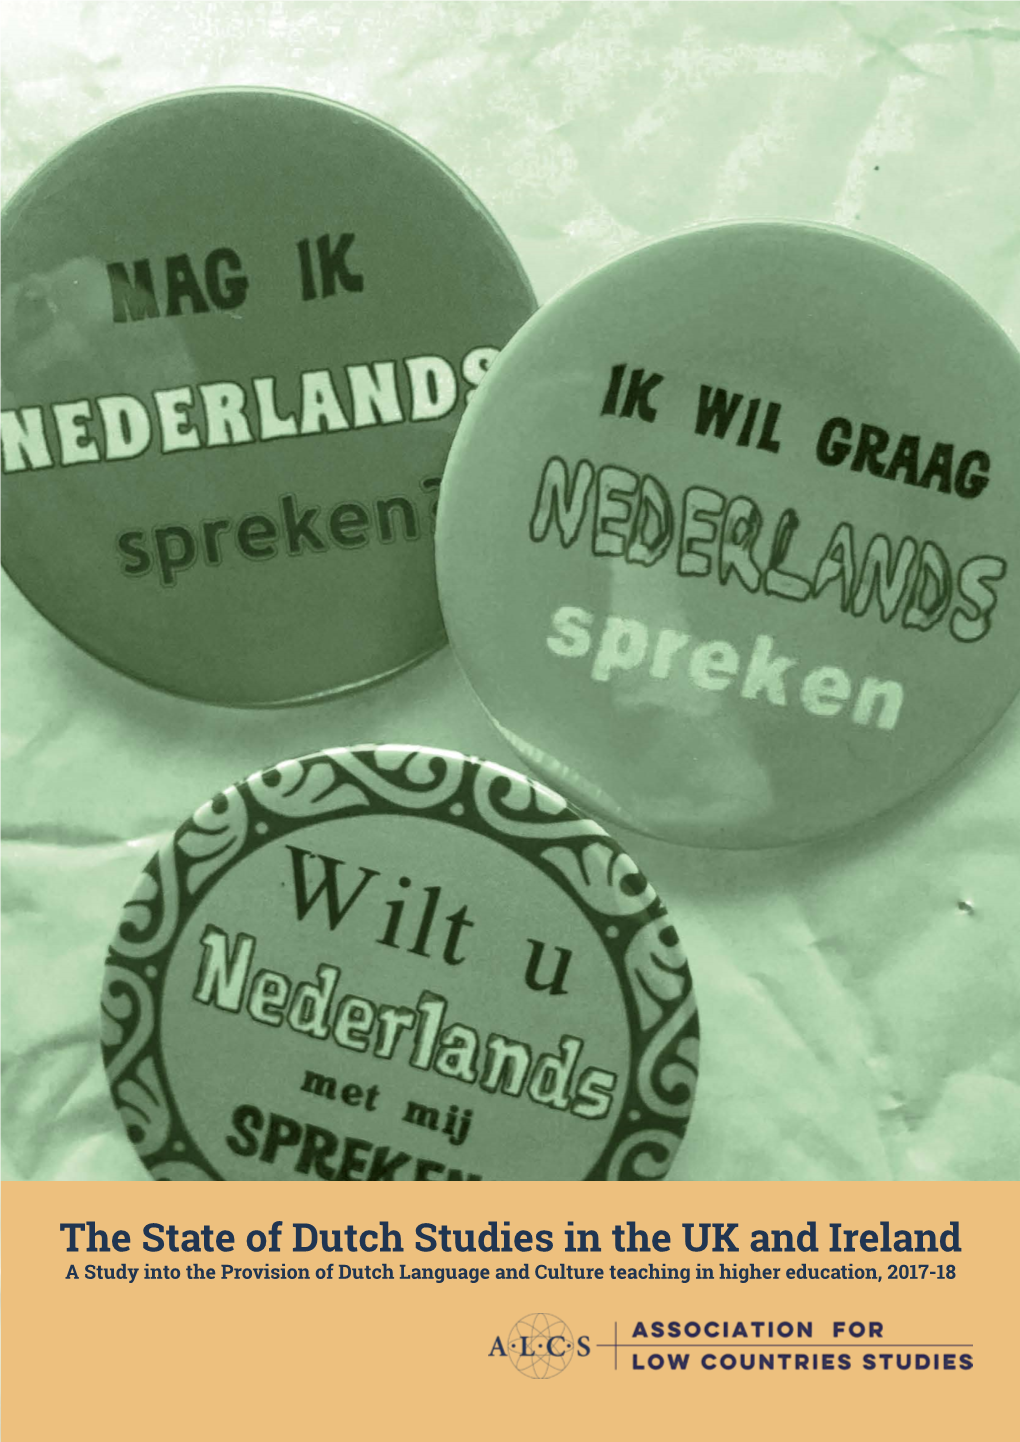 The State of Dutch Studies in the UK and Ireland 2018